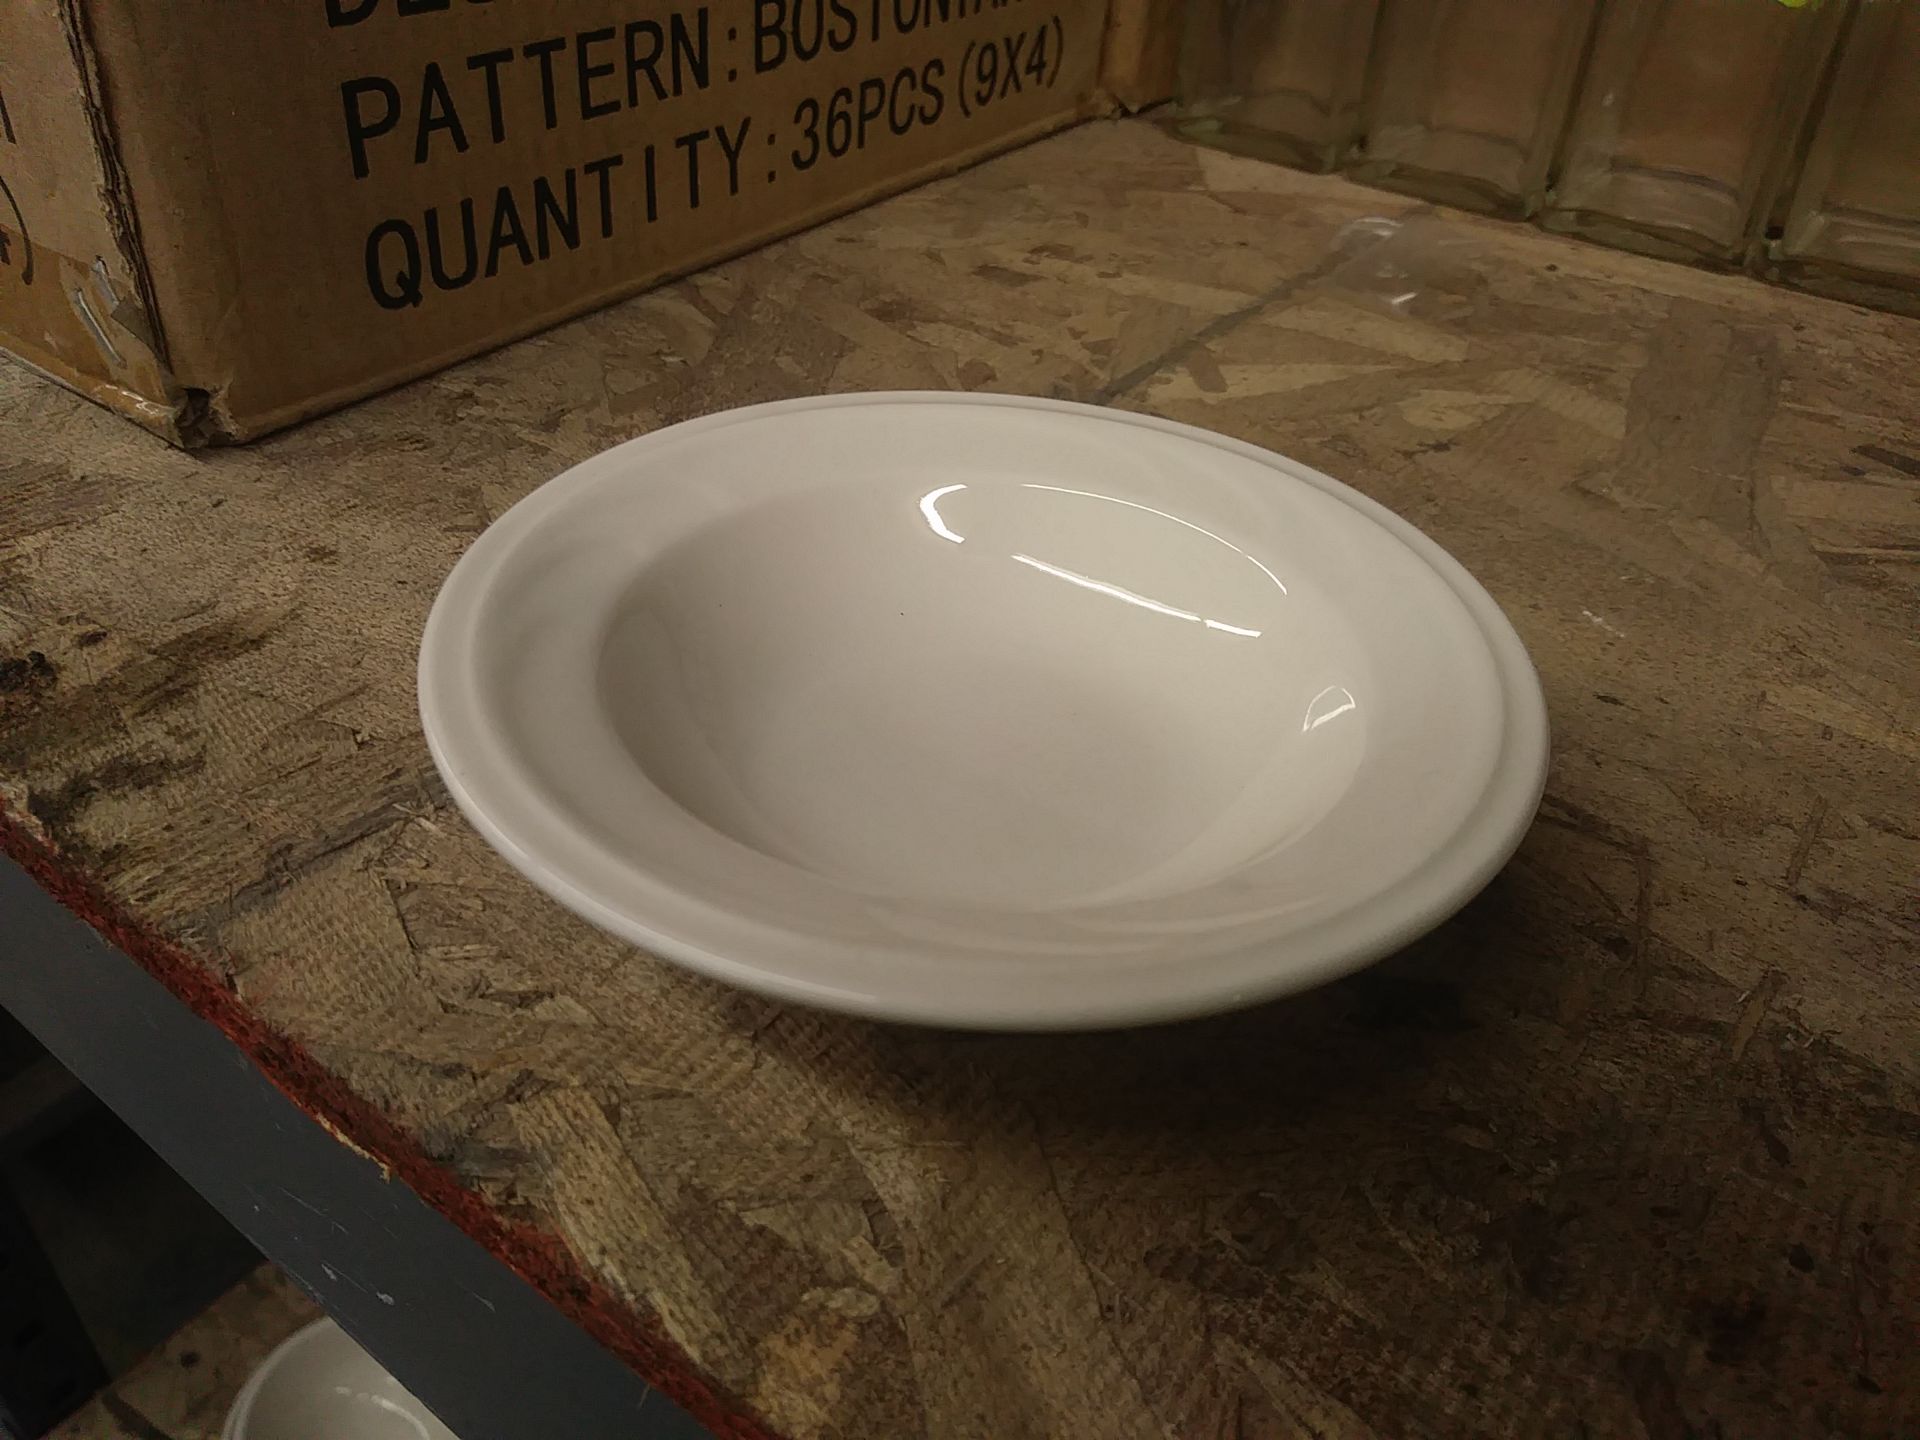 CAMEO 4.75" FRUIT BOWL (includes approx QTY 329 in this lot)